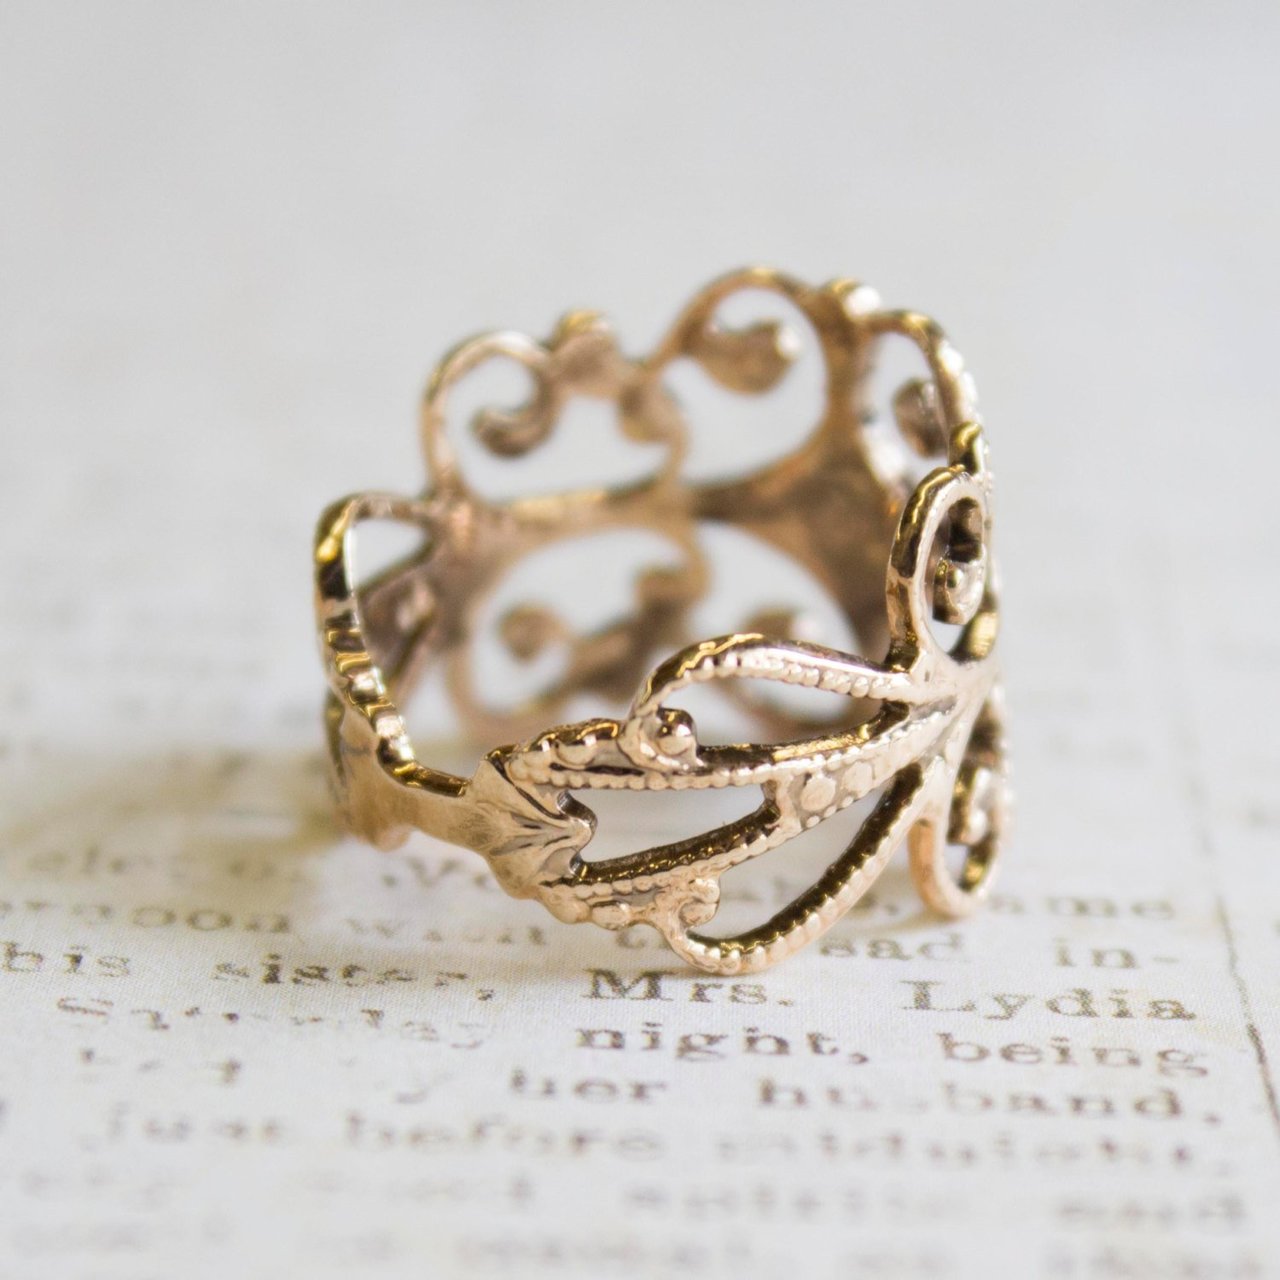 Vintage Ring Filigree Ring Antique 18k Gold Edwardian Style Womans Ornate Handmade Jewelry #R553 Size: 4